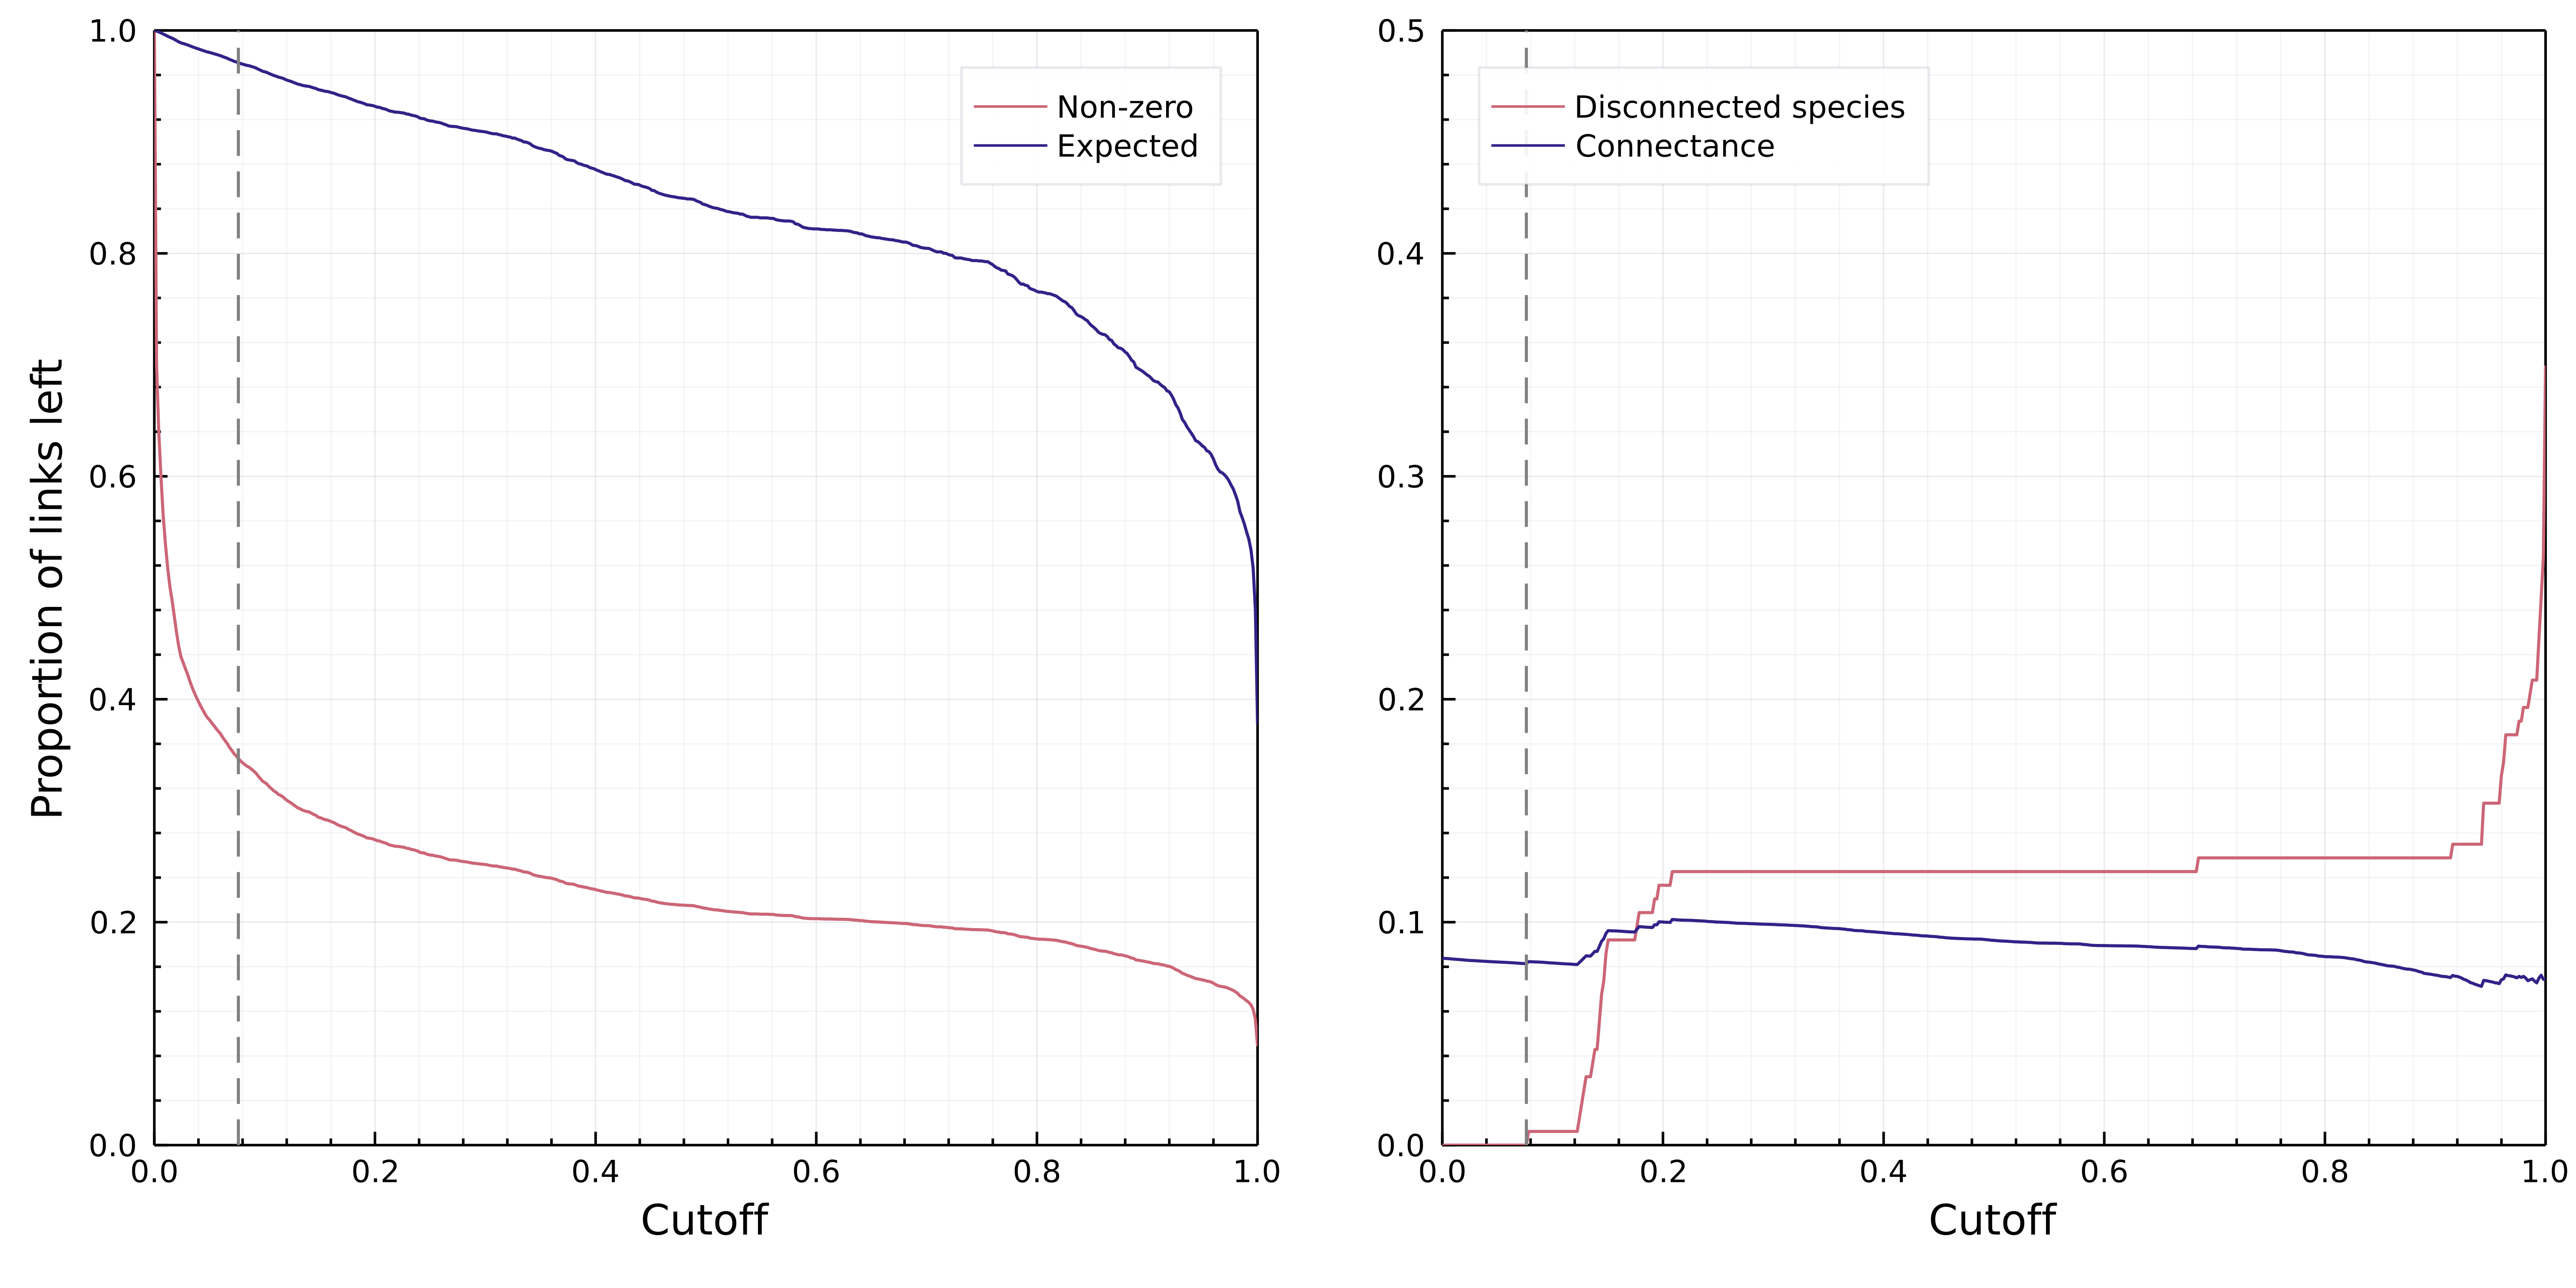 Figure 5: Left: effect of varying the cutoff for probabilities to be considered non-zero on the number of unique links and on \hat{L}, the probabilistic estimate of the number of links assuming that all interactions are independent. Right: effect of varying the cutoff on the number of disconnected species, and on network connectance. In both panels, the grey line indicates the cutoff P(i\rightarrow j) \approx 0.08 that resulted in the first species losing all of its interactions.